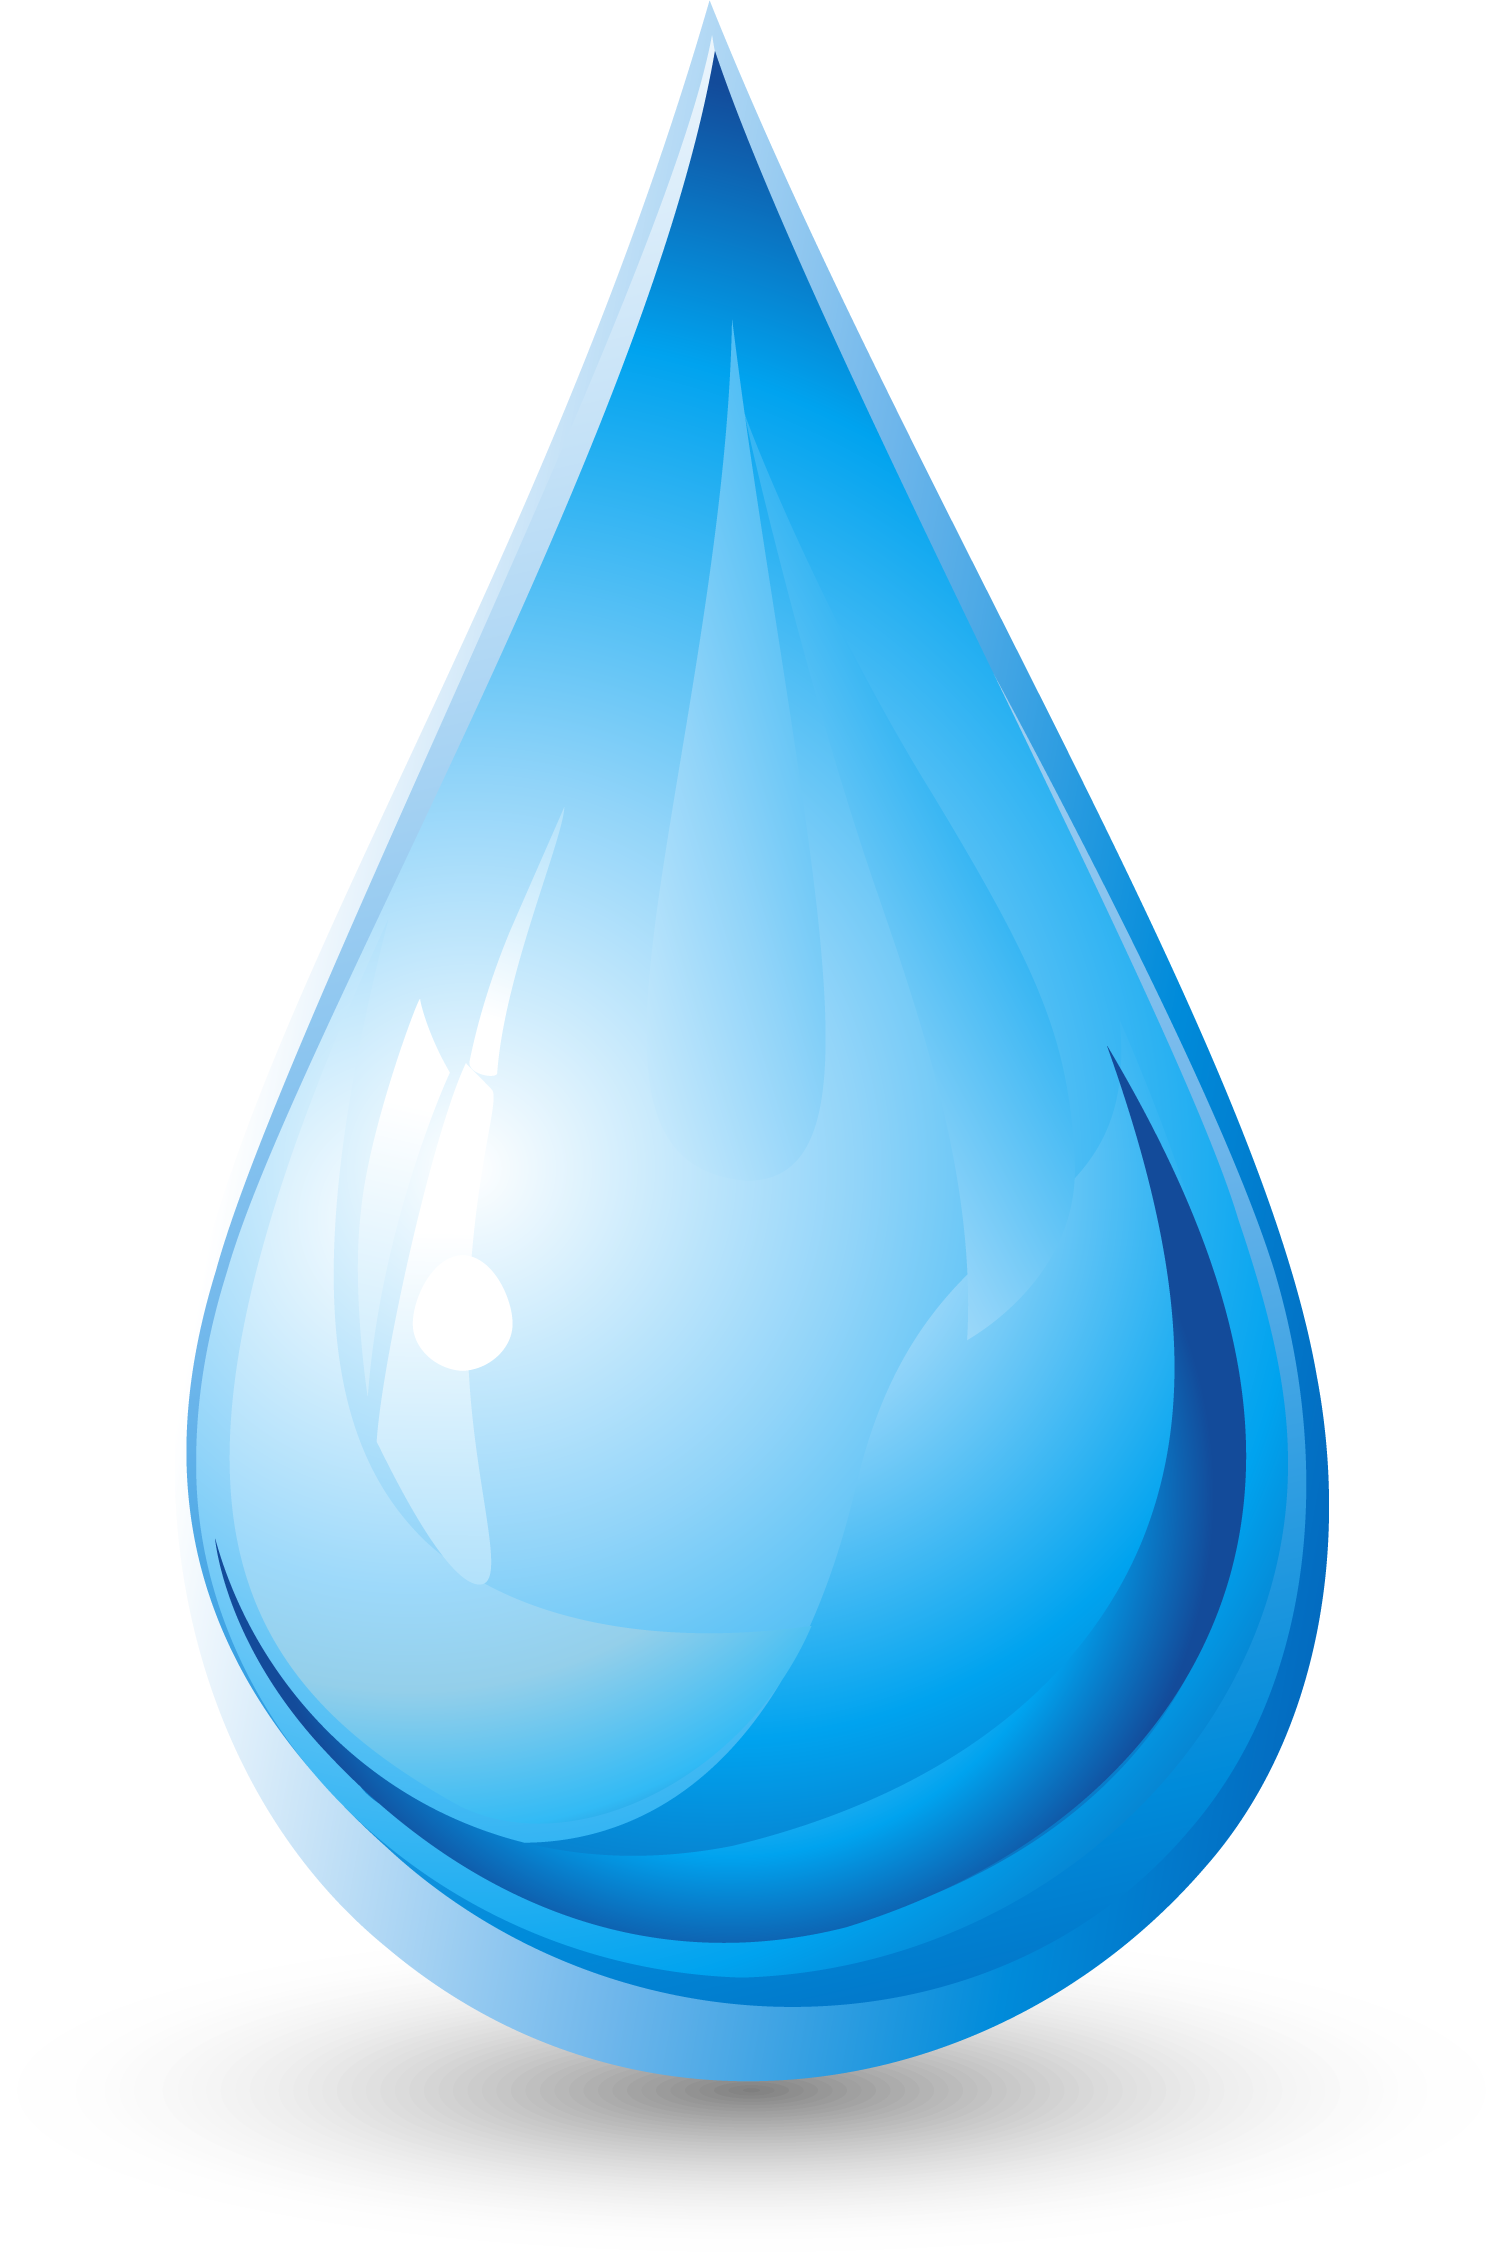 Blue Water Drops PNG Image